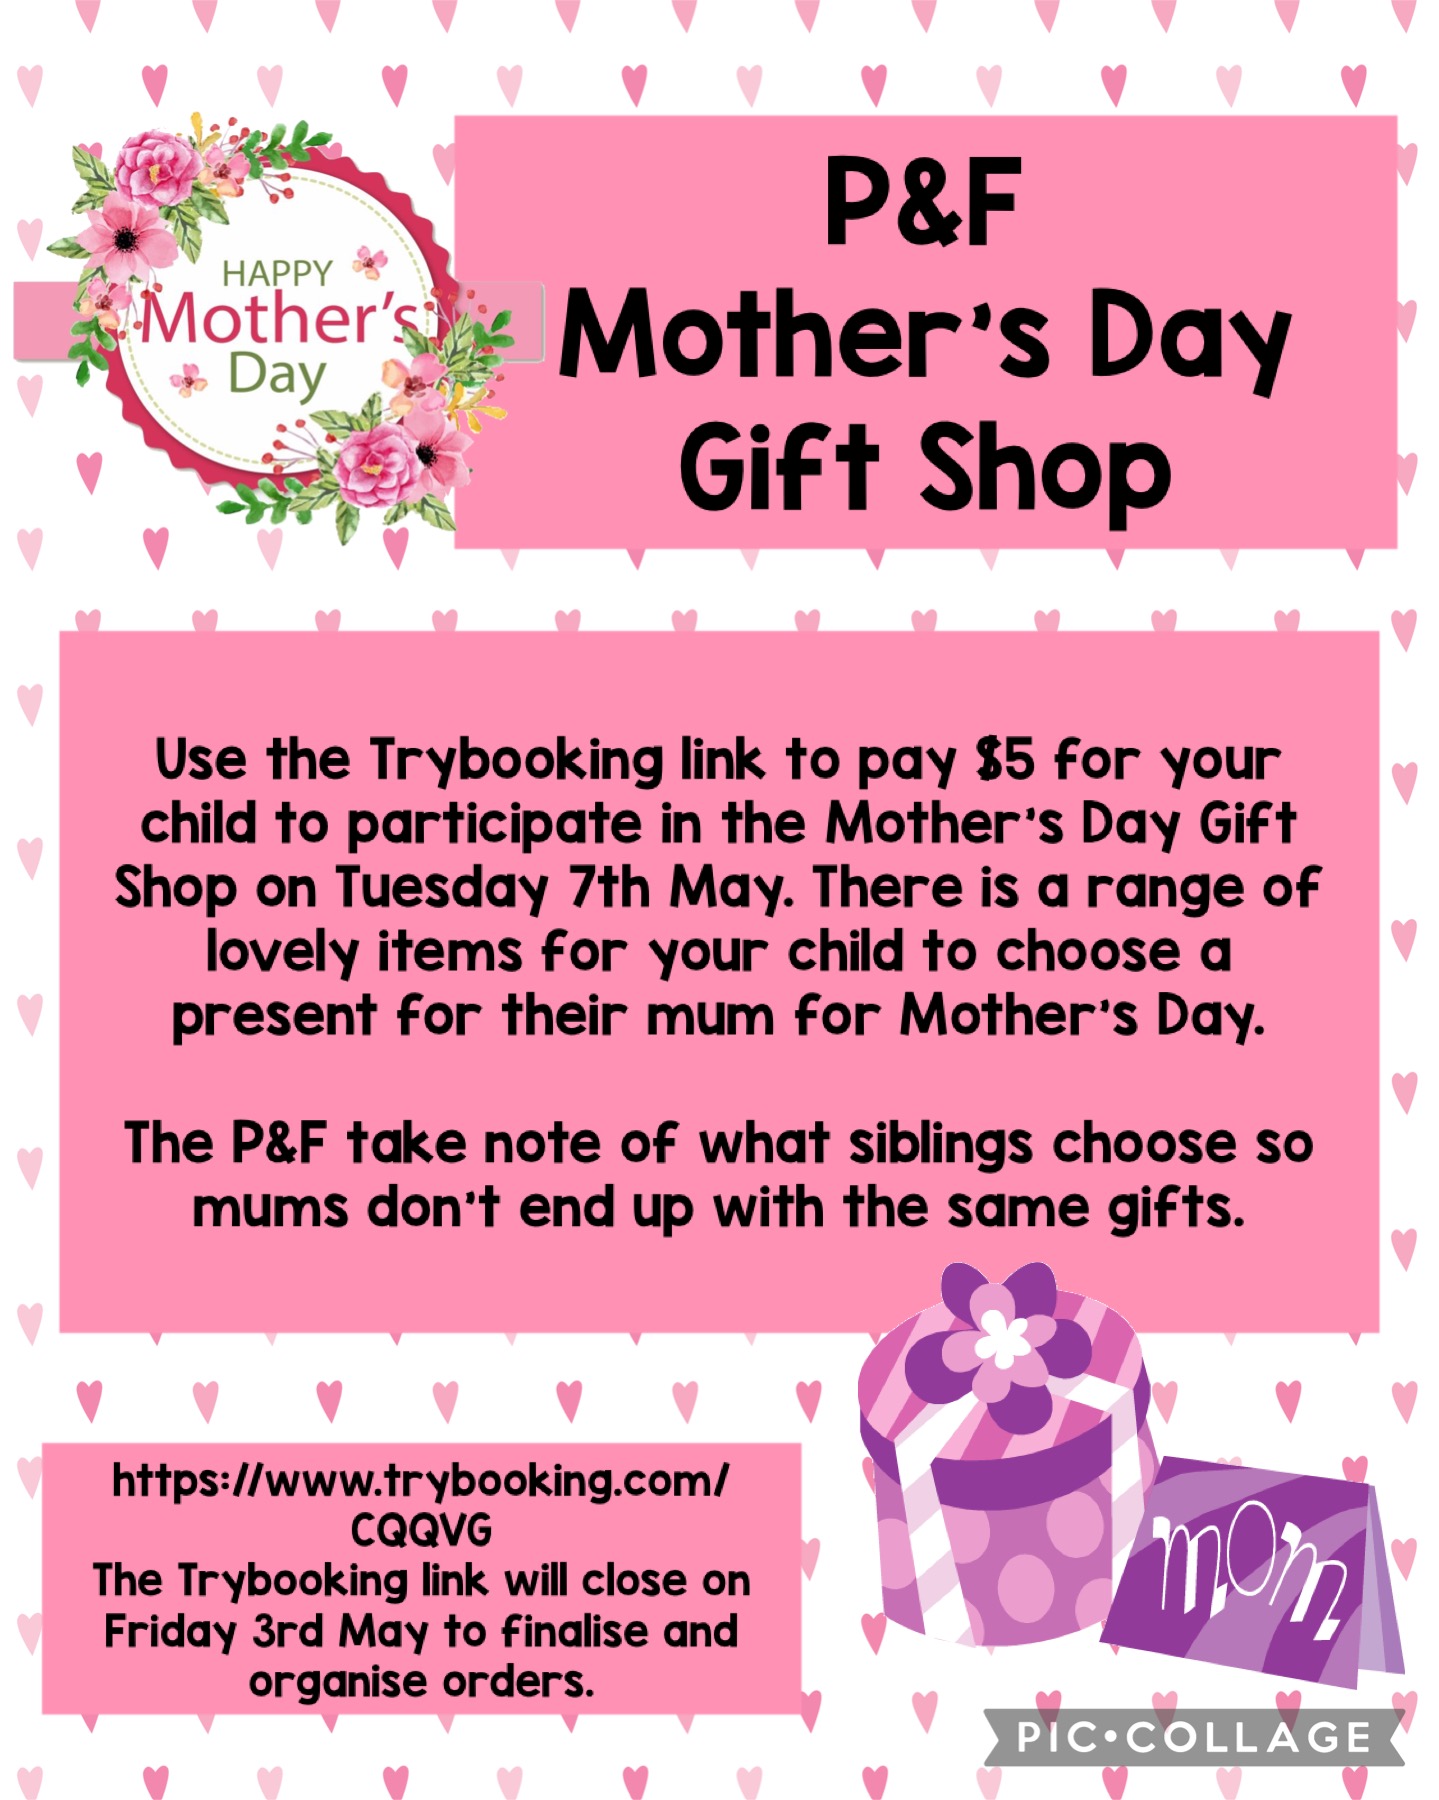 P&F Mother's Day Gift Shop